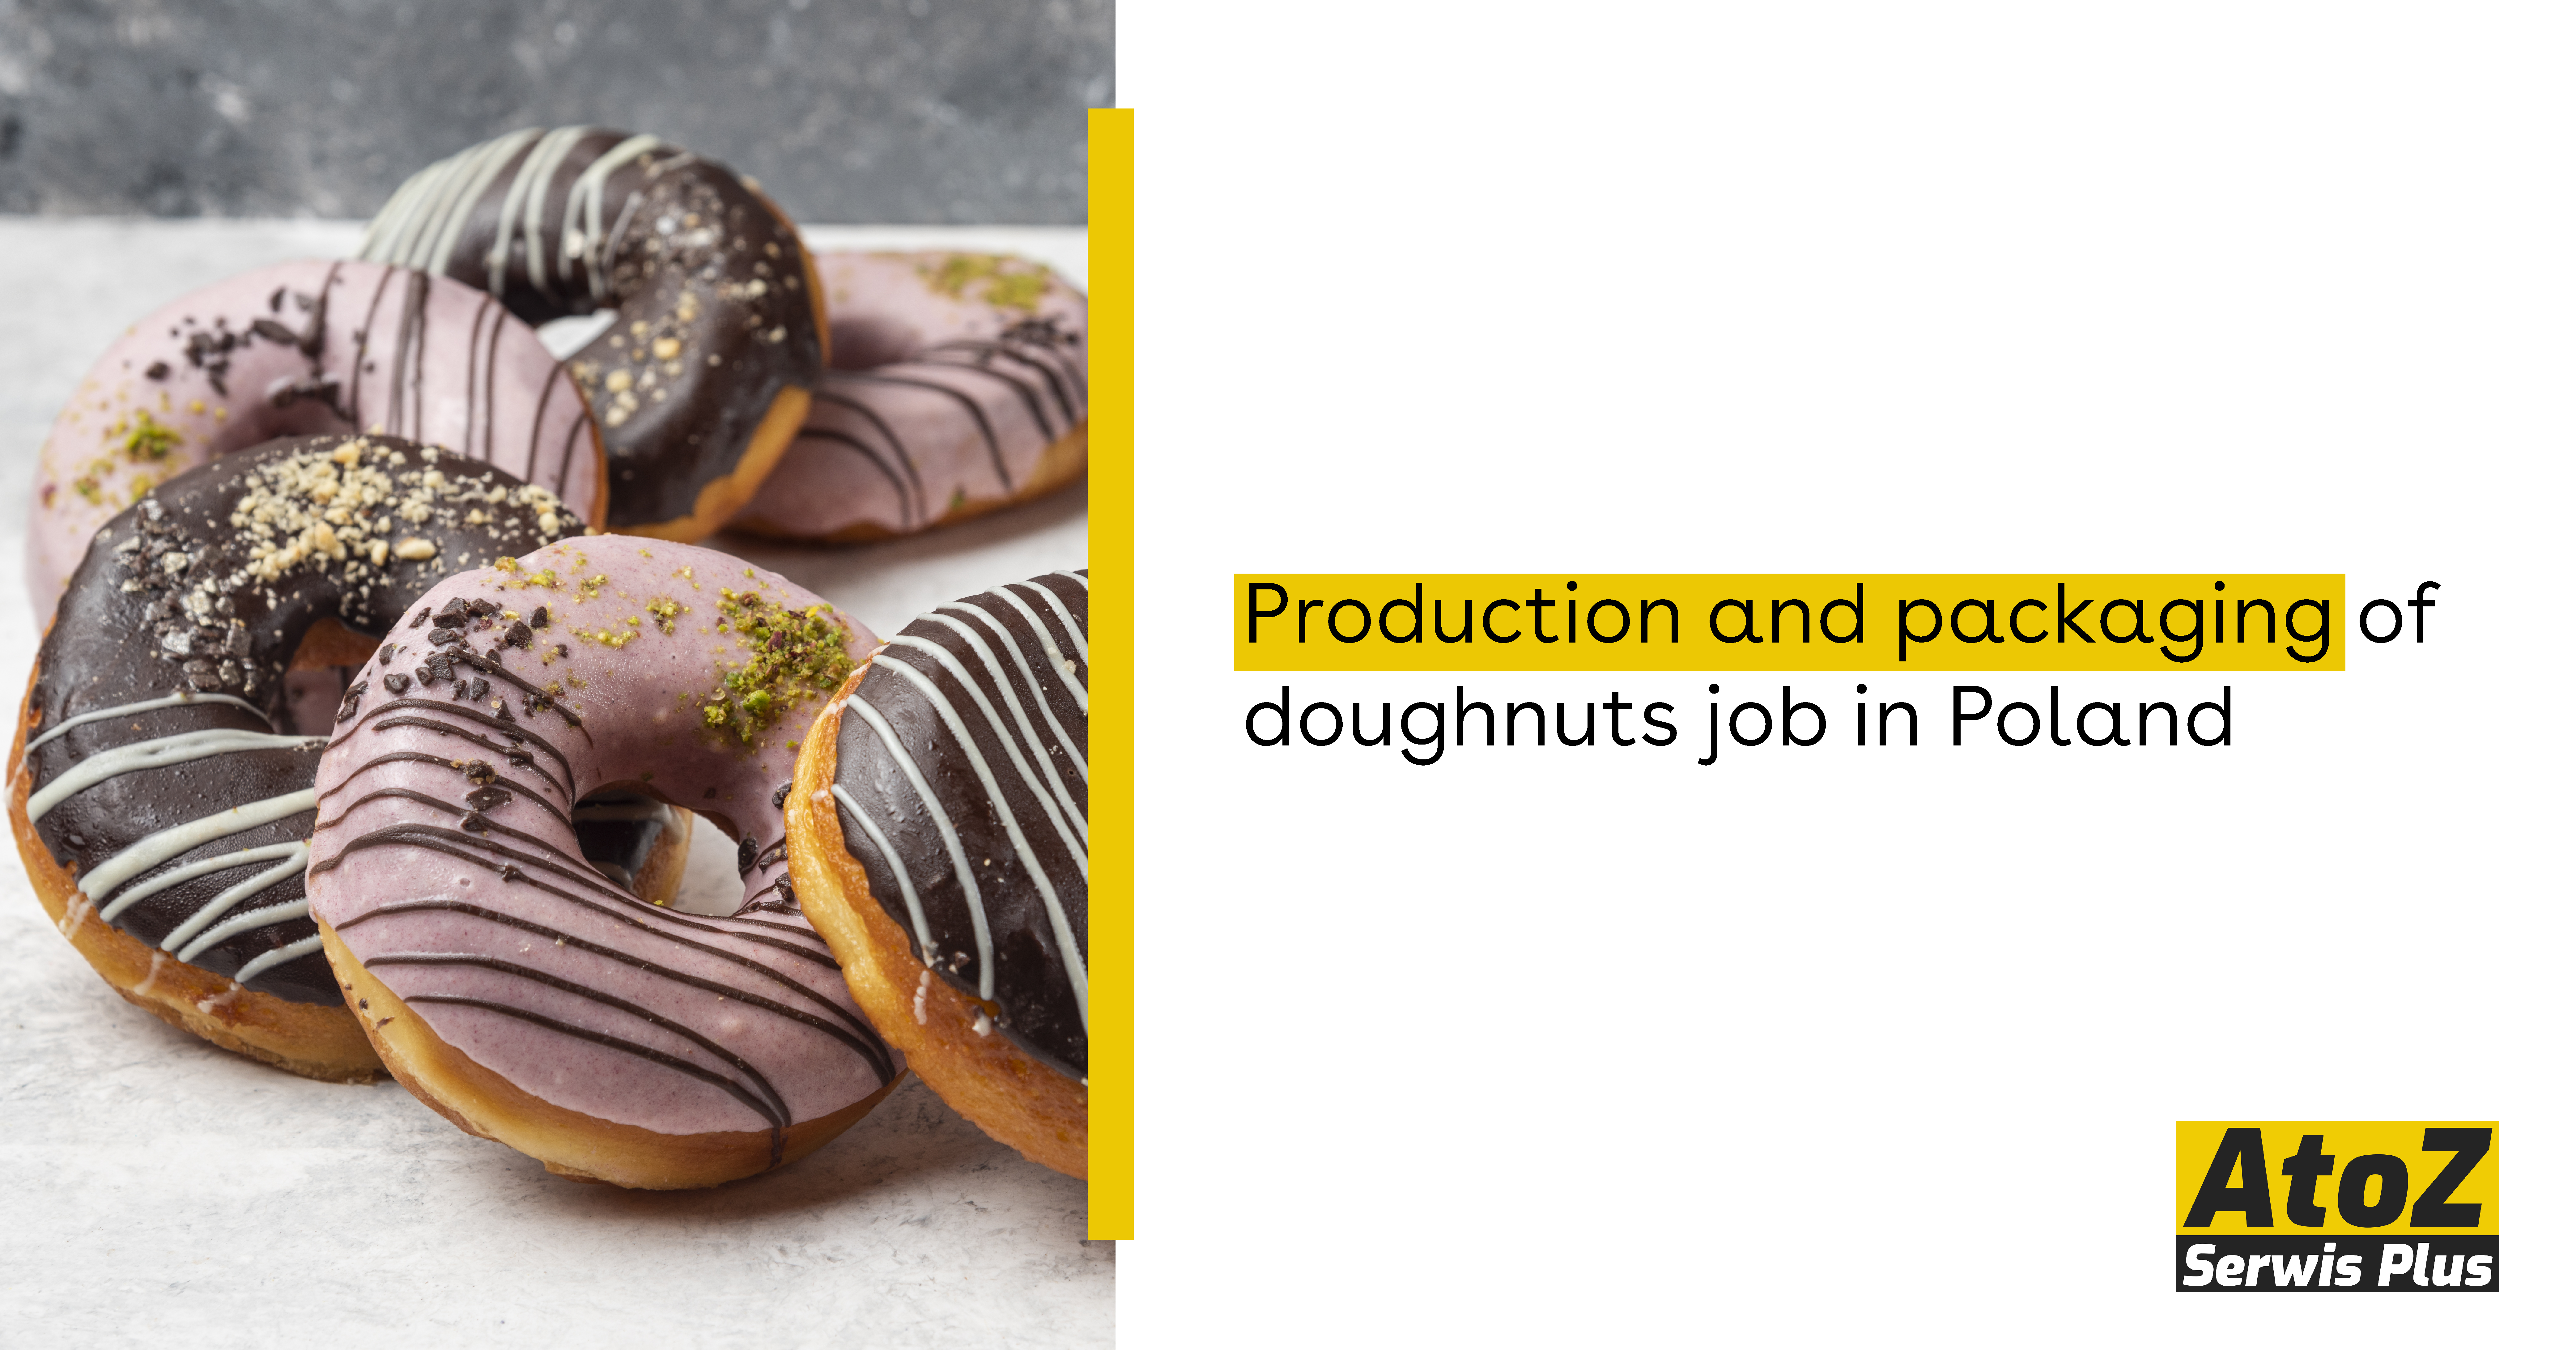 production-and-packaging-of-doughnuts-job-in-poland